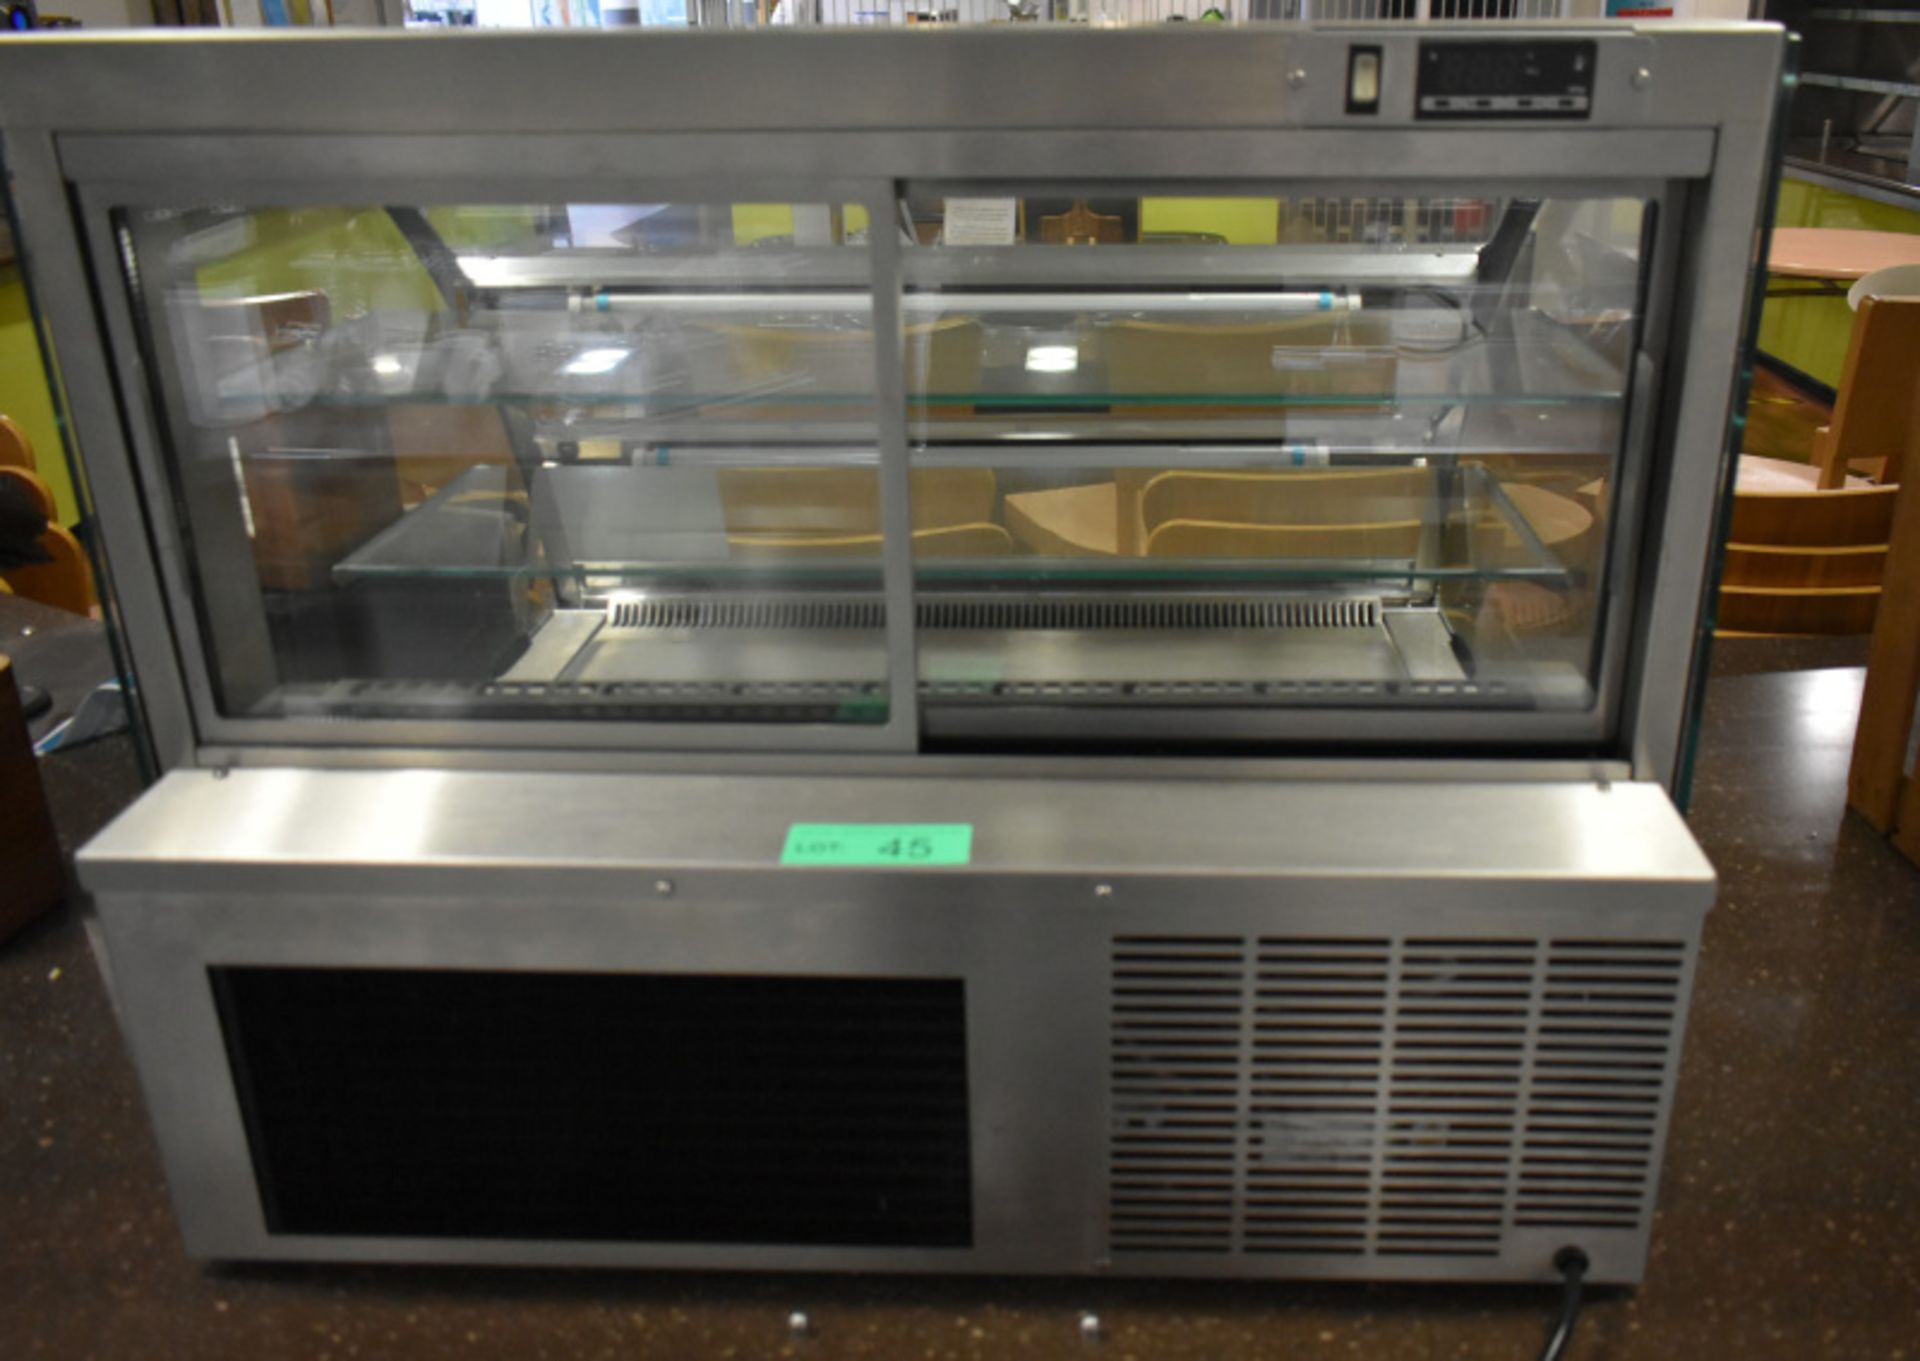 Counterline Hot food display unit, L 780mm x W 740mm x H 630mm - Image 2 of 3